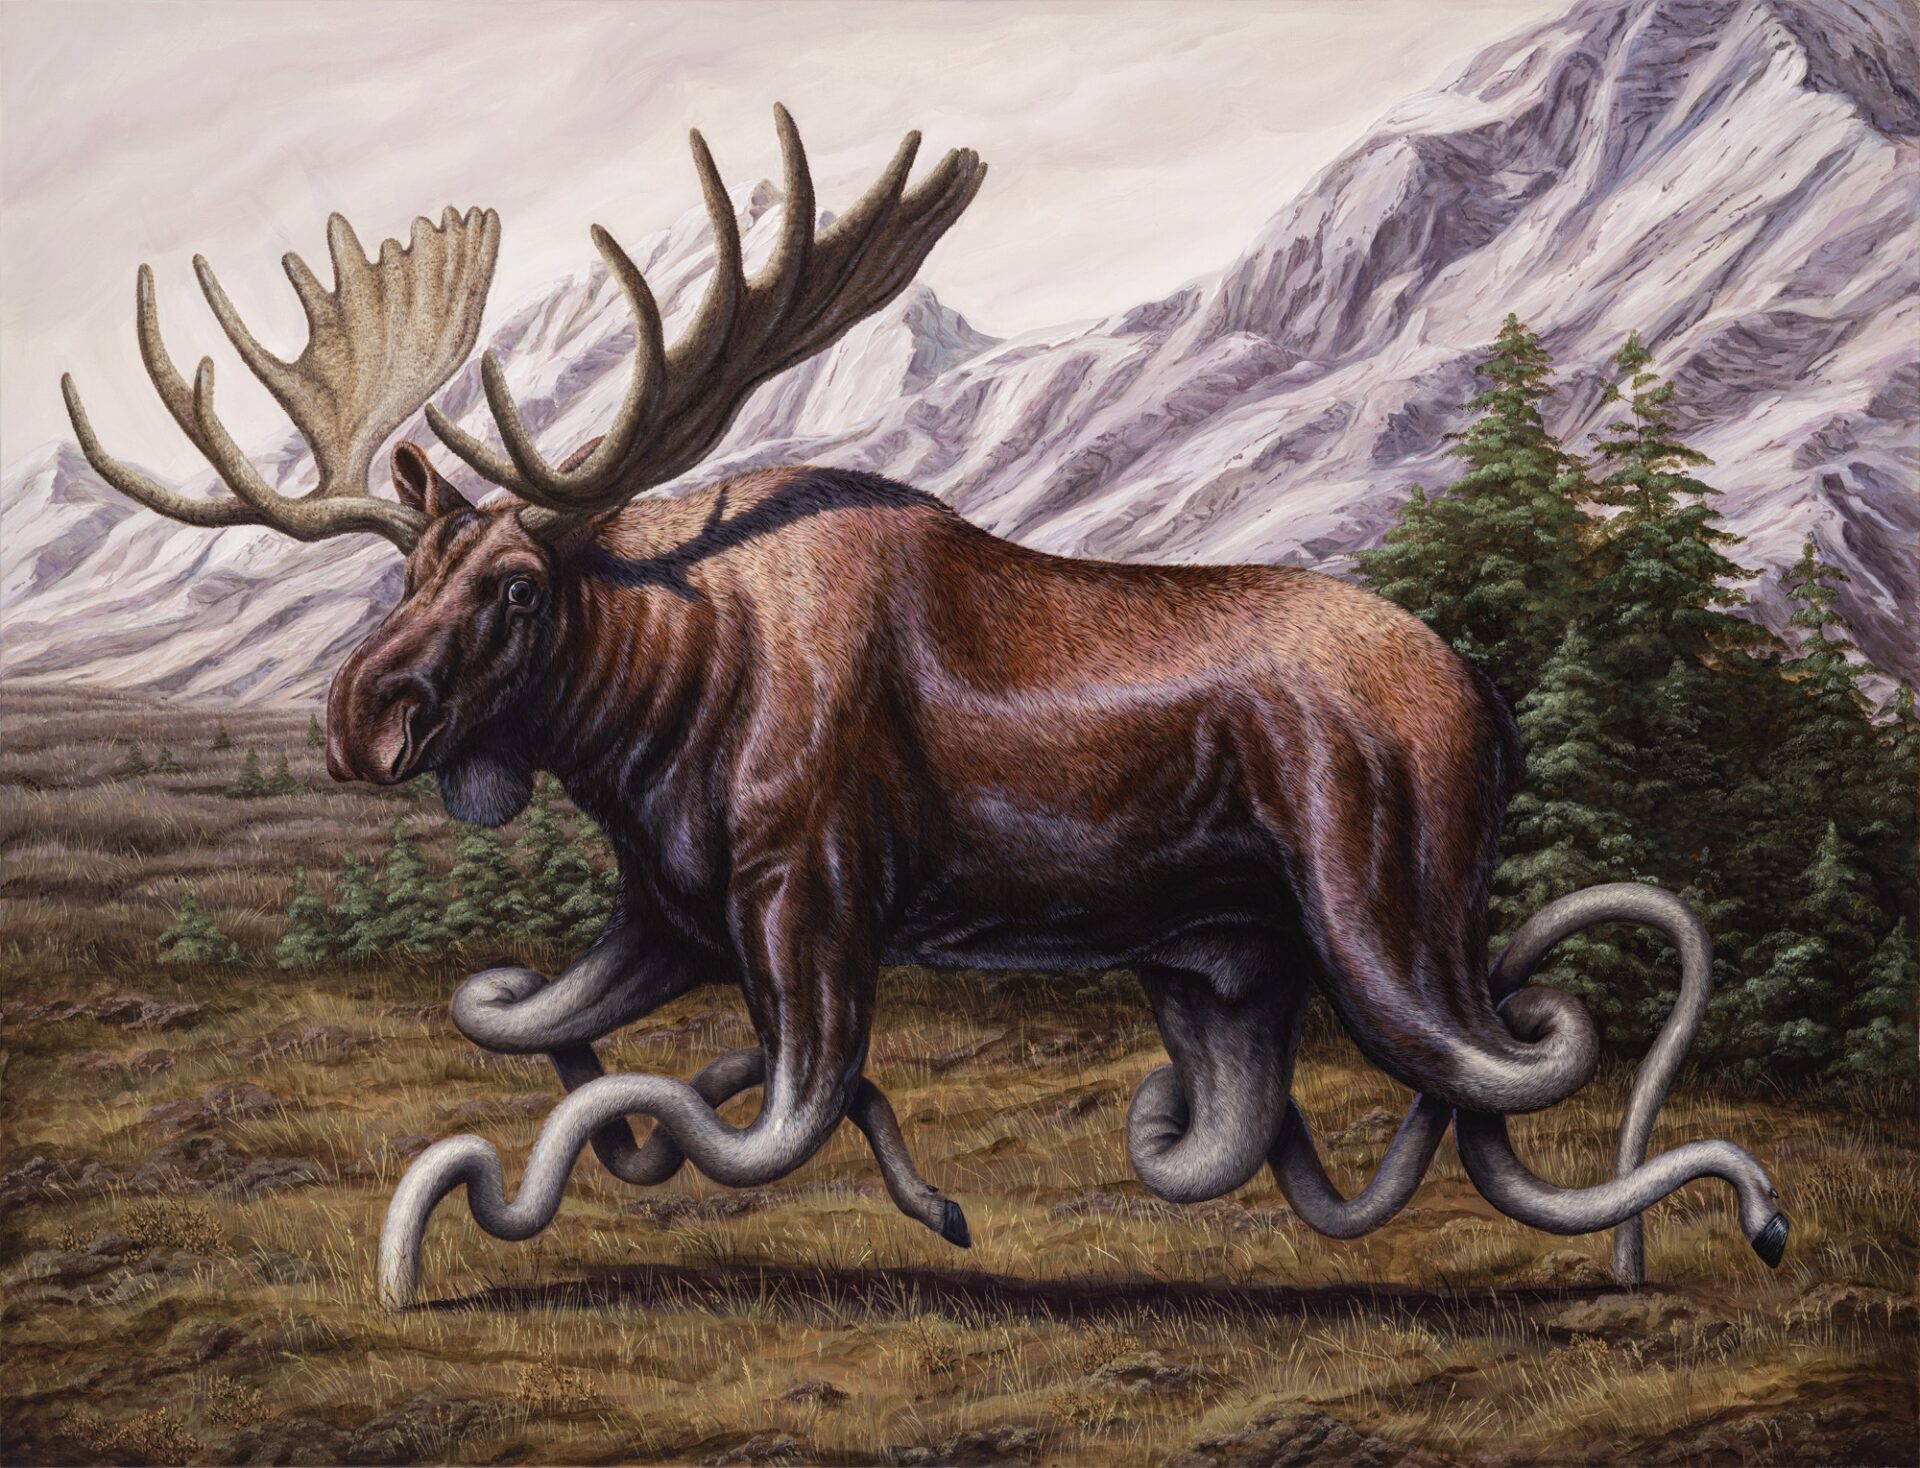 a moose with squiggly legs that make him levitate in a mountain landscape